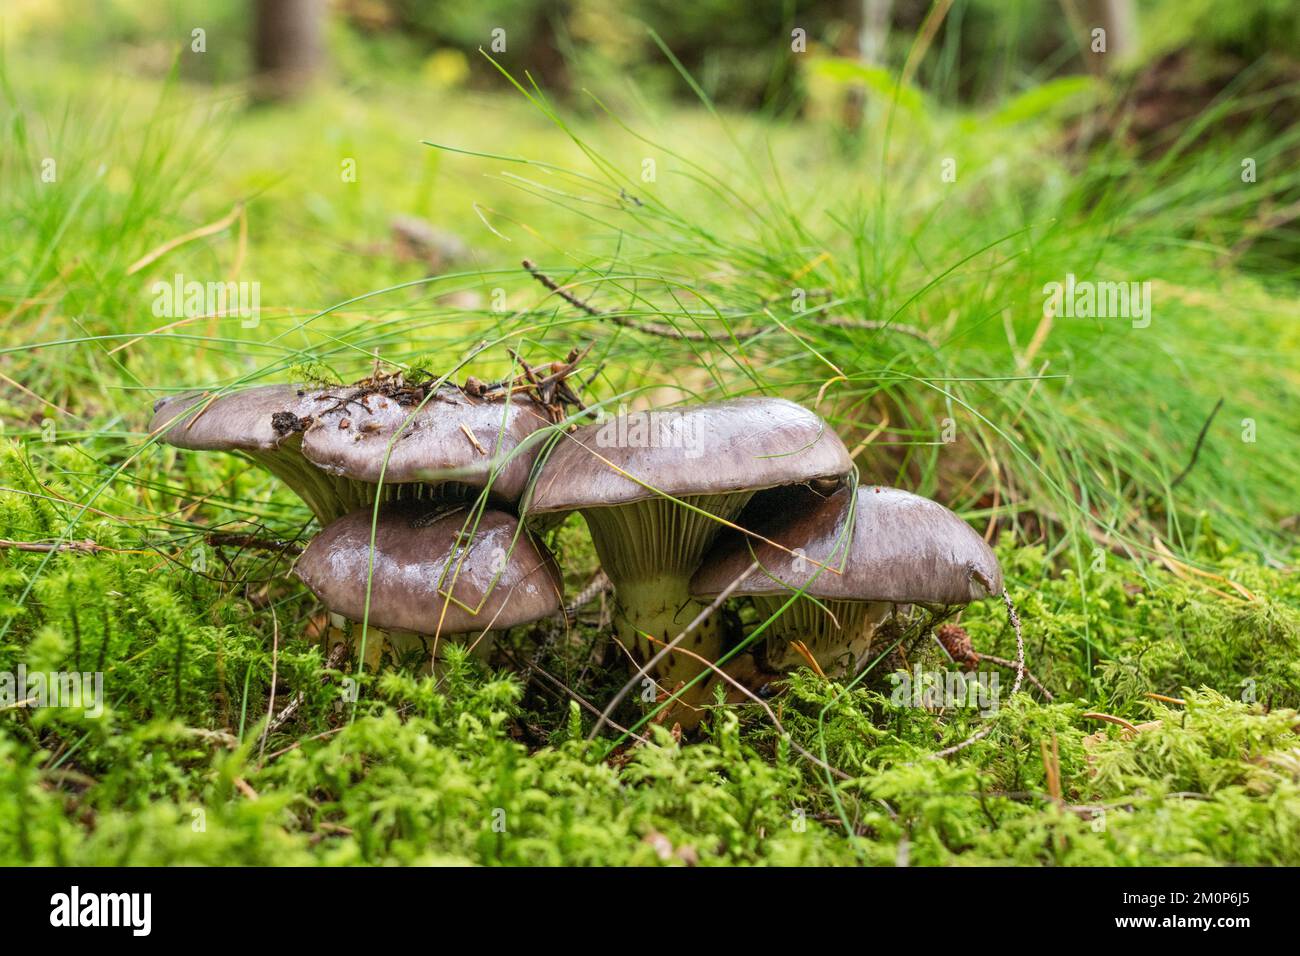 A close-up of Slimy spike-cap mushroom growing in a Spruce forest in Estonia, Northern Europe Stock Photo